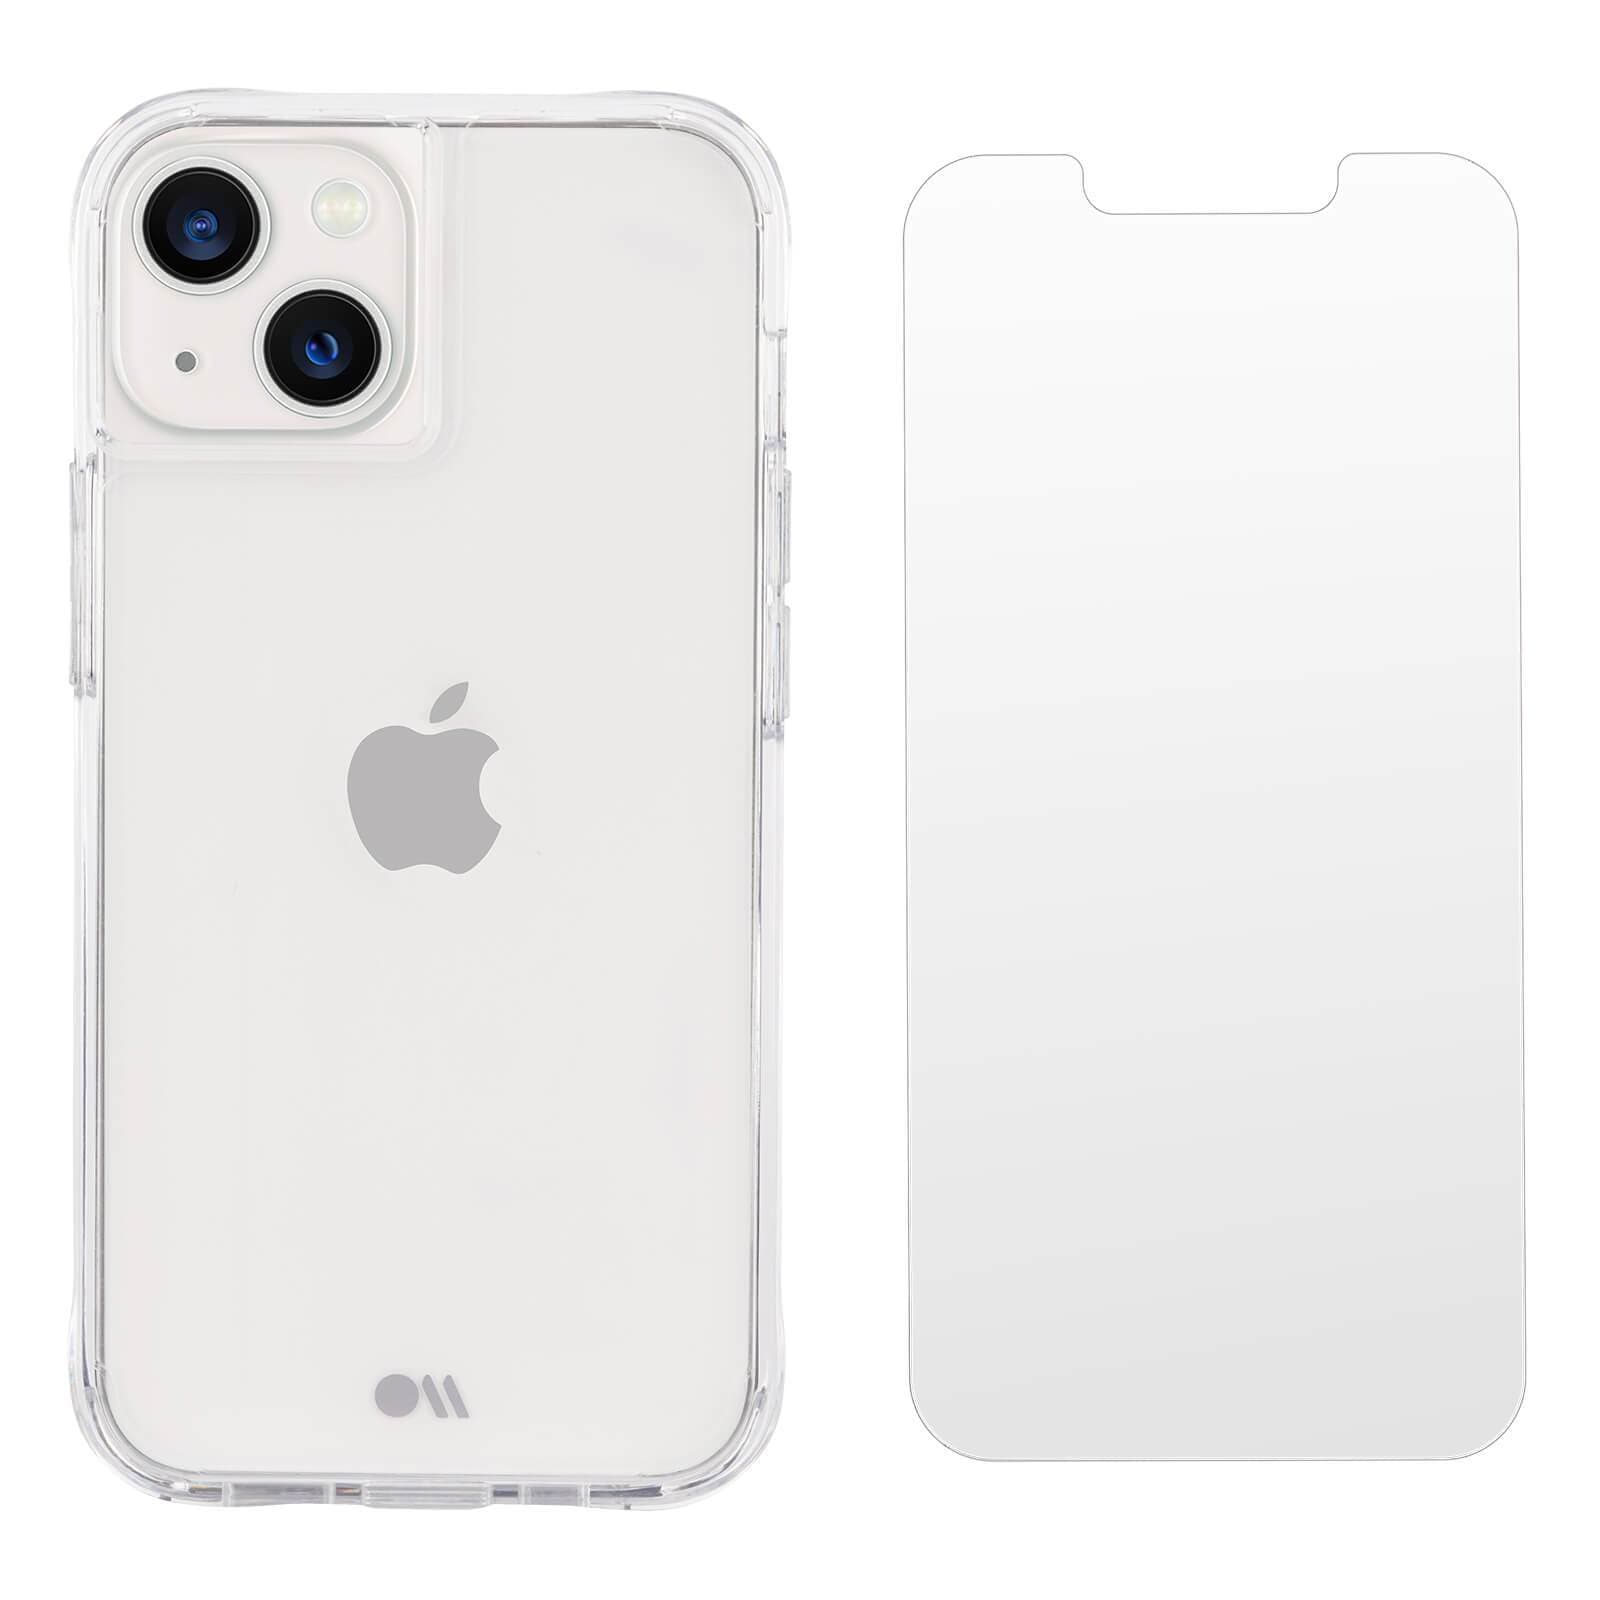 Tough Clear case and screen protector included. color::Clear